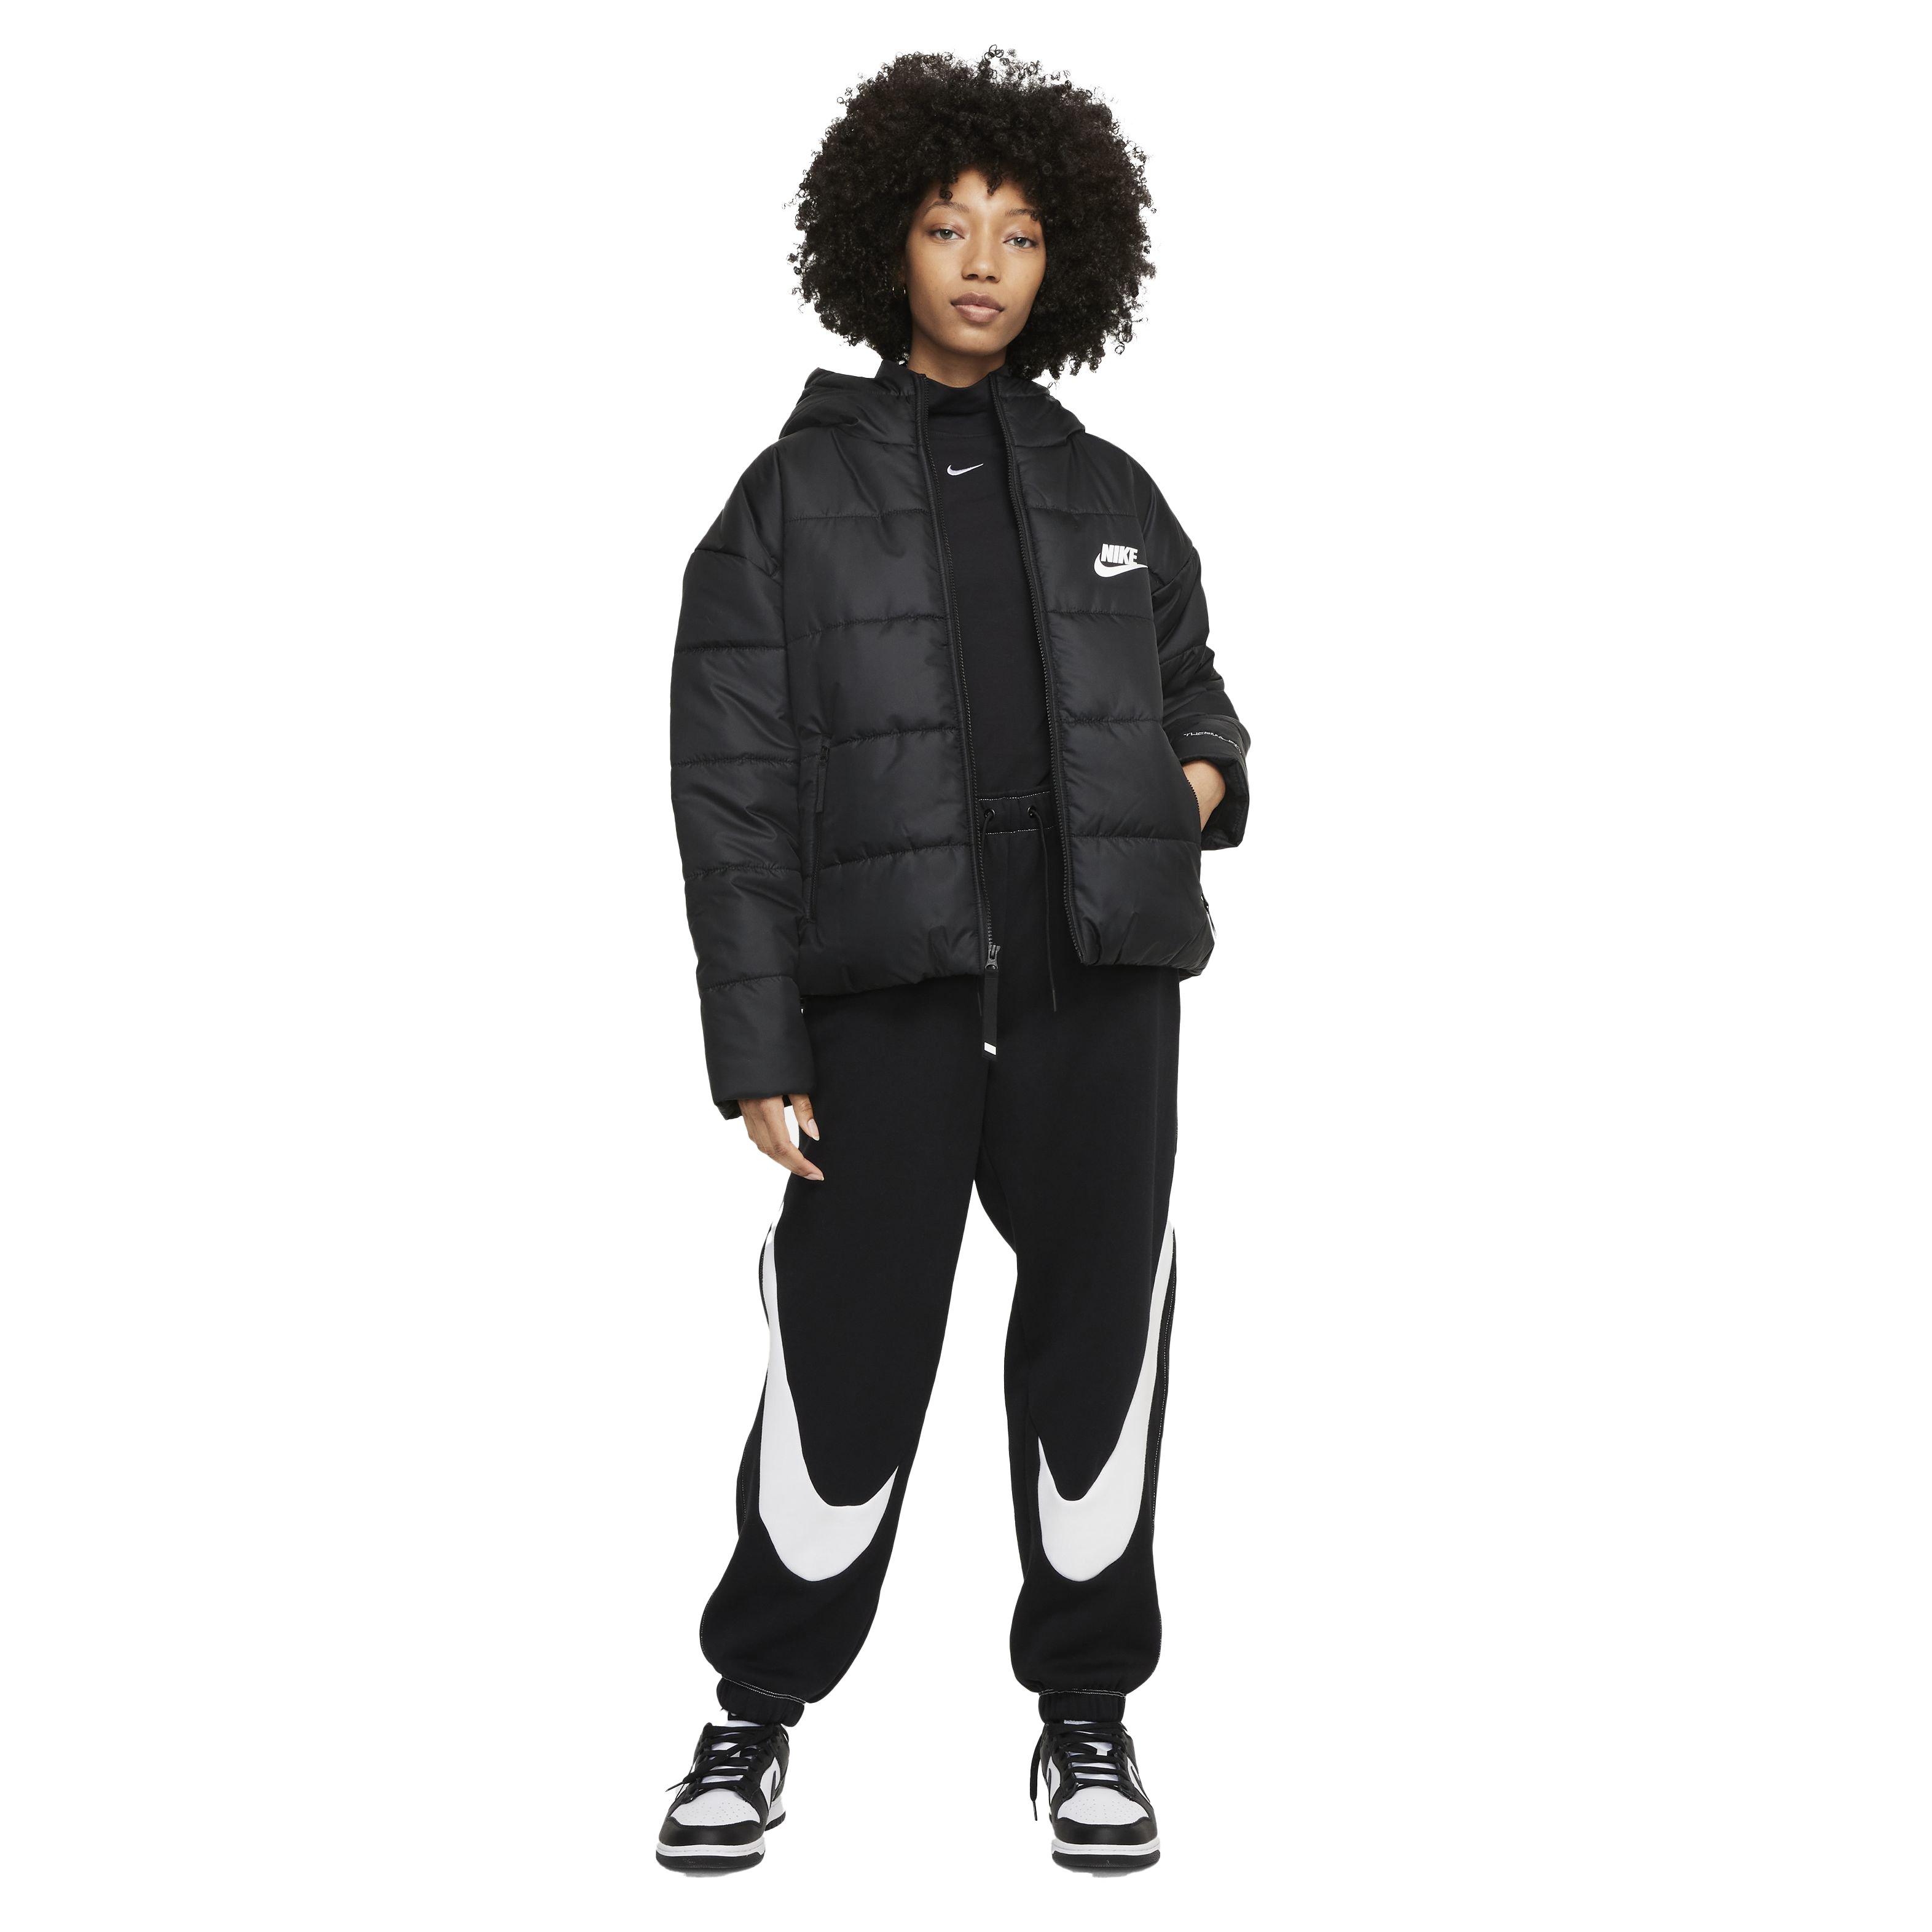 Nike Therma-fit Repel Women's Hooded Sports Jacket 